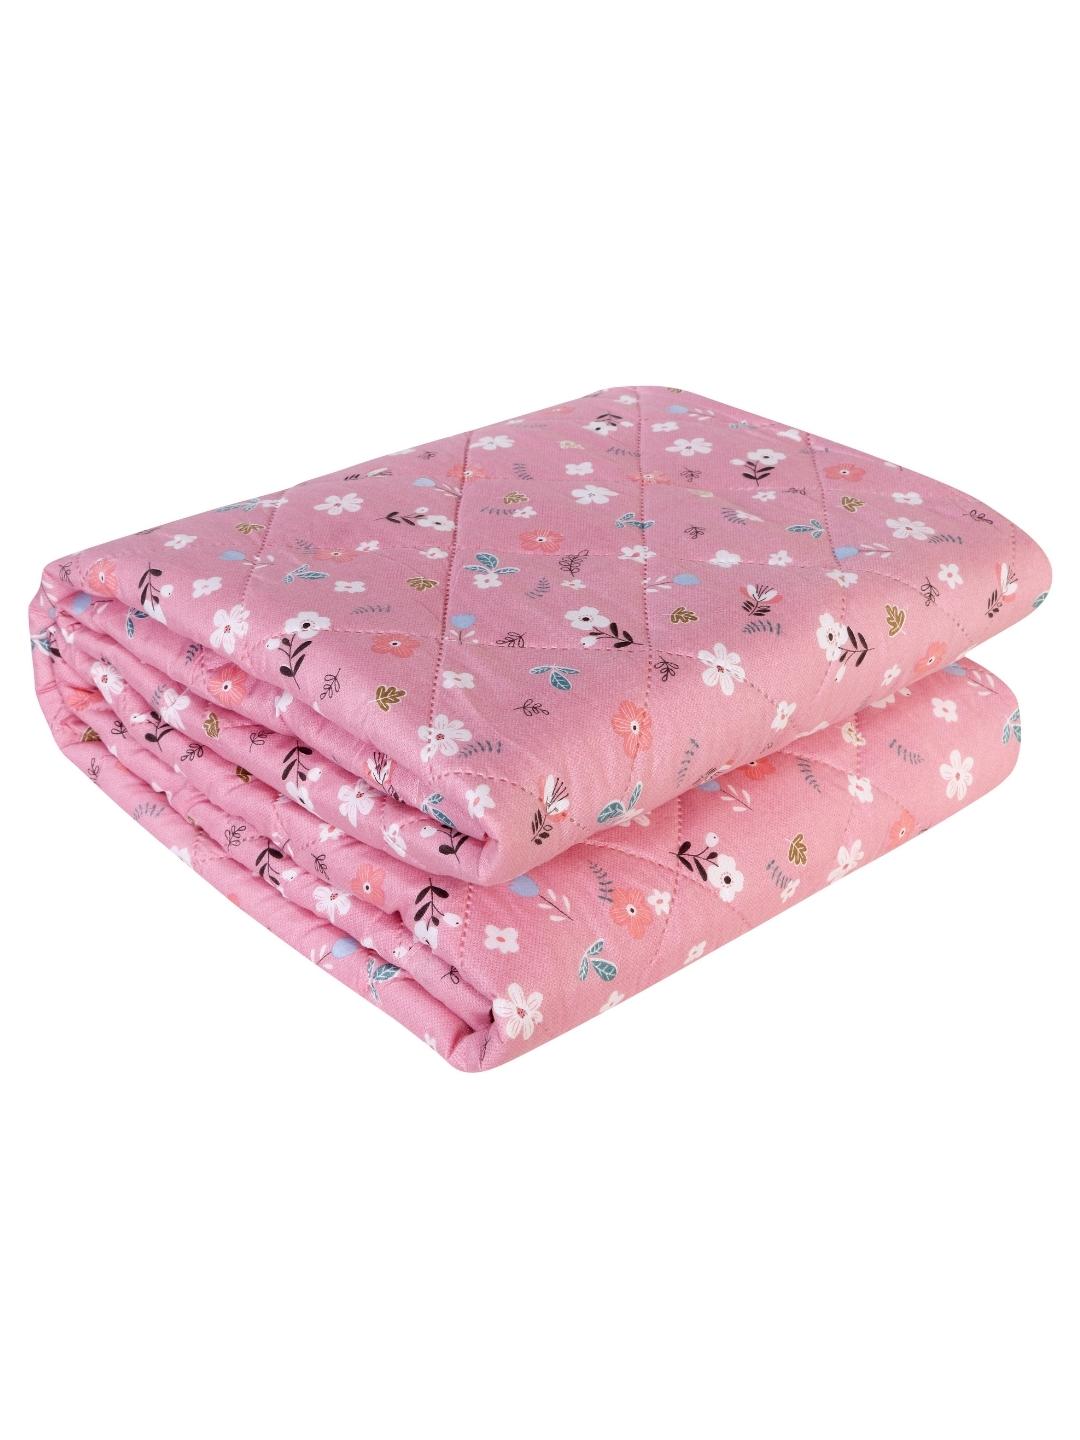 Floral Print Set of 2 Single Bed Light Weight Comforter-Pink